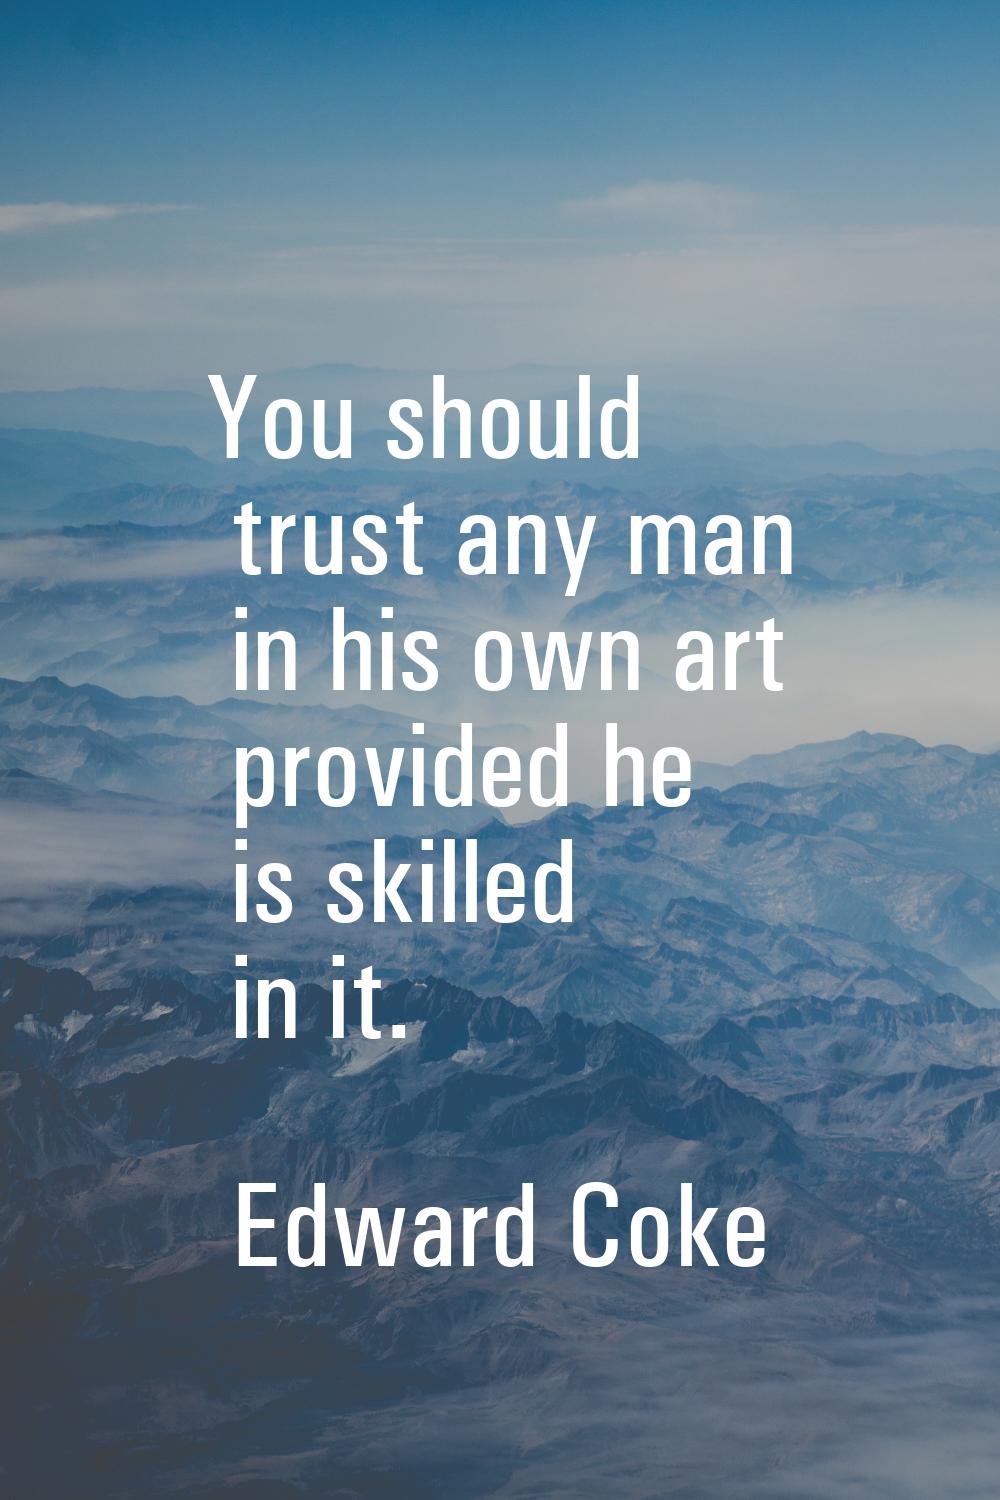 You should trust any man in his own art provided he is skilled in it.